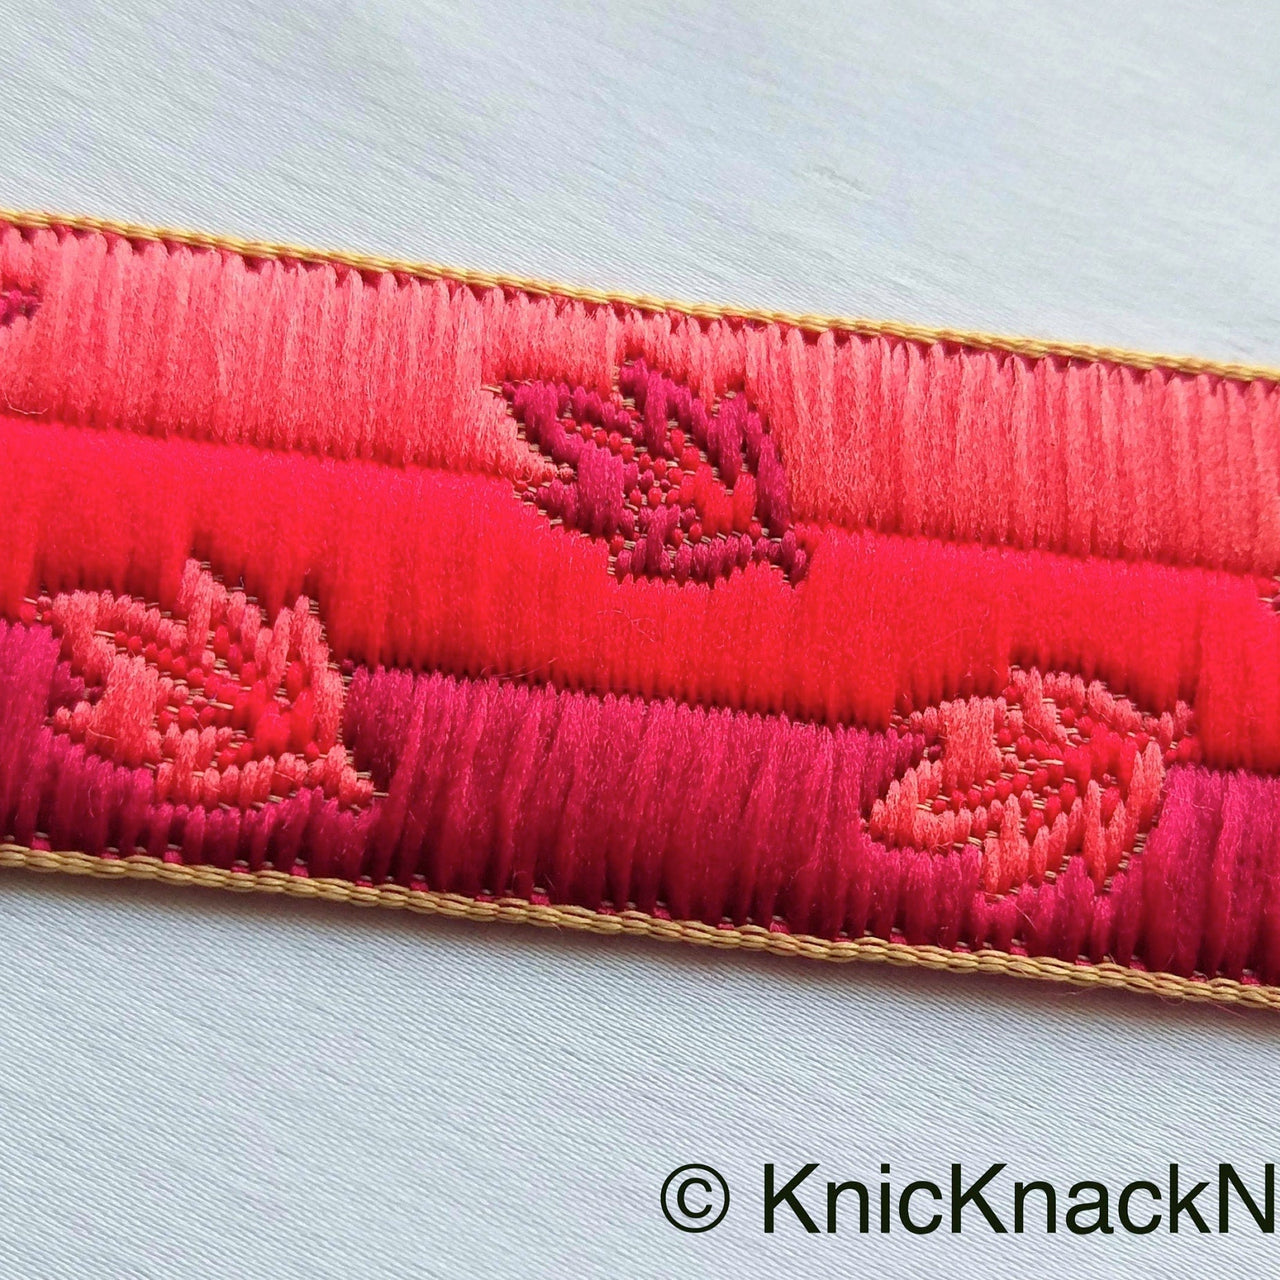 Red Embroidered Trim With Three Tones of Red Threads, Leaf Embroidery Trim, Approx. 34mm wide - 210119L43